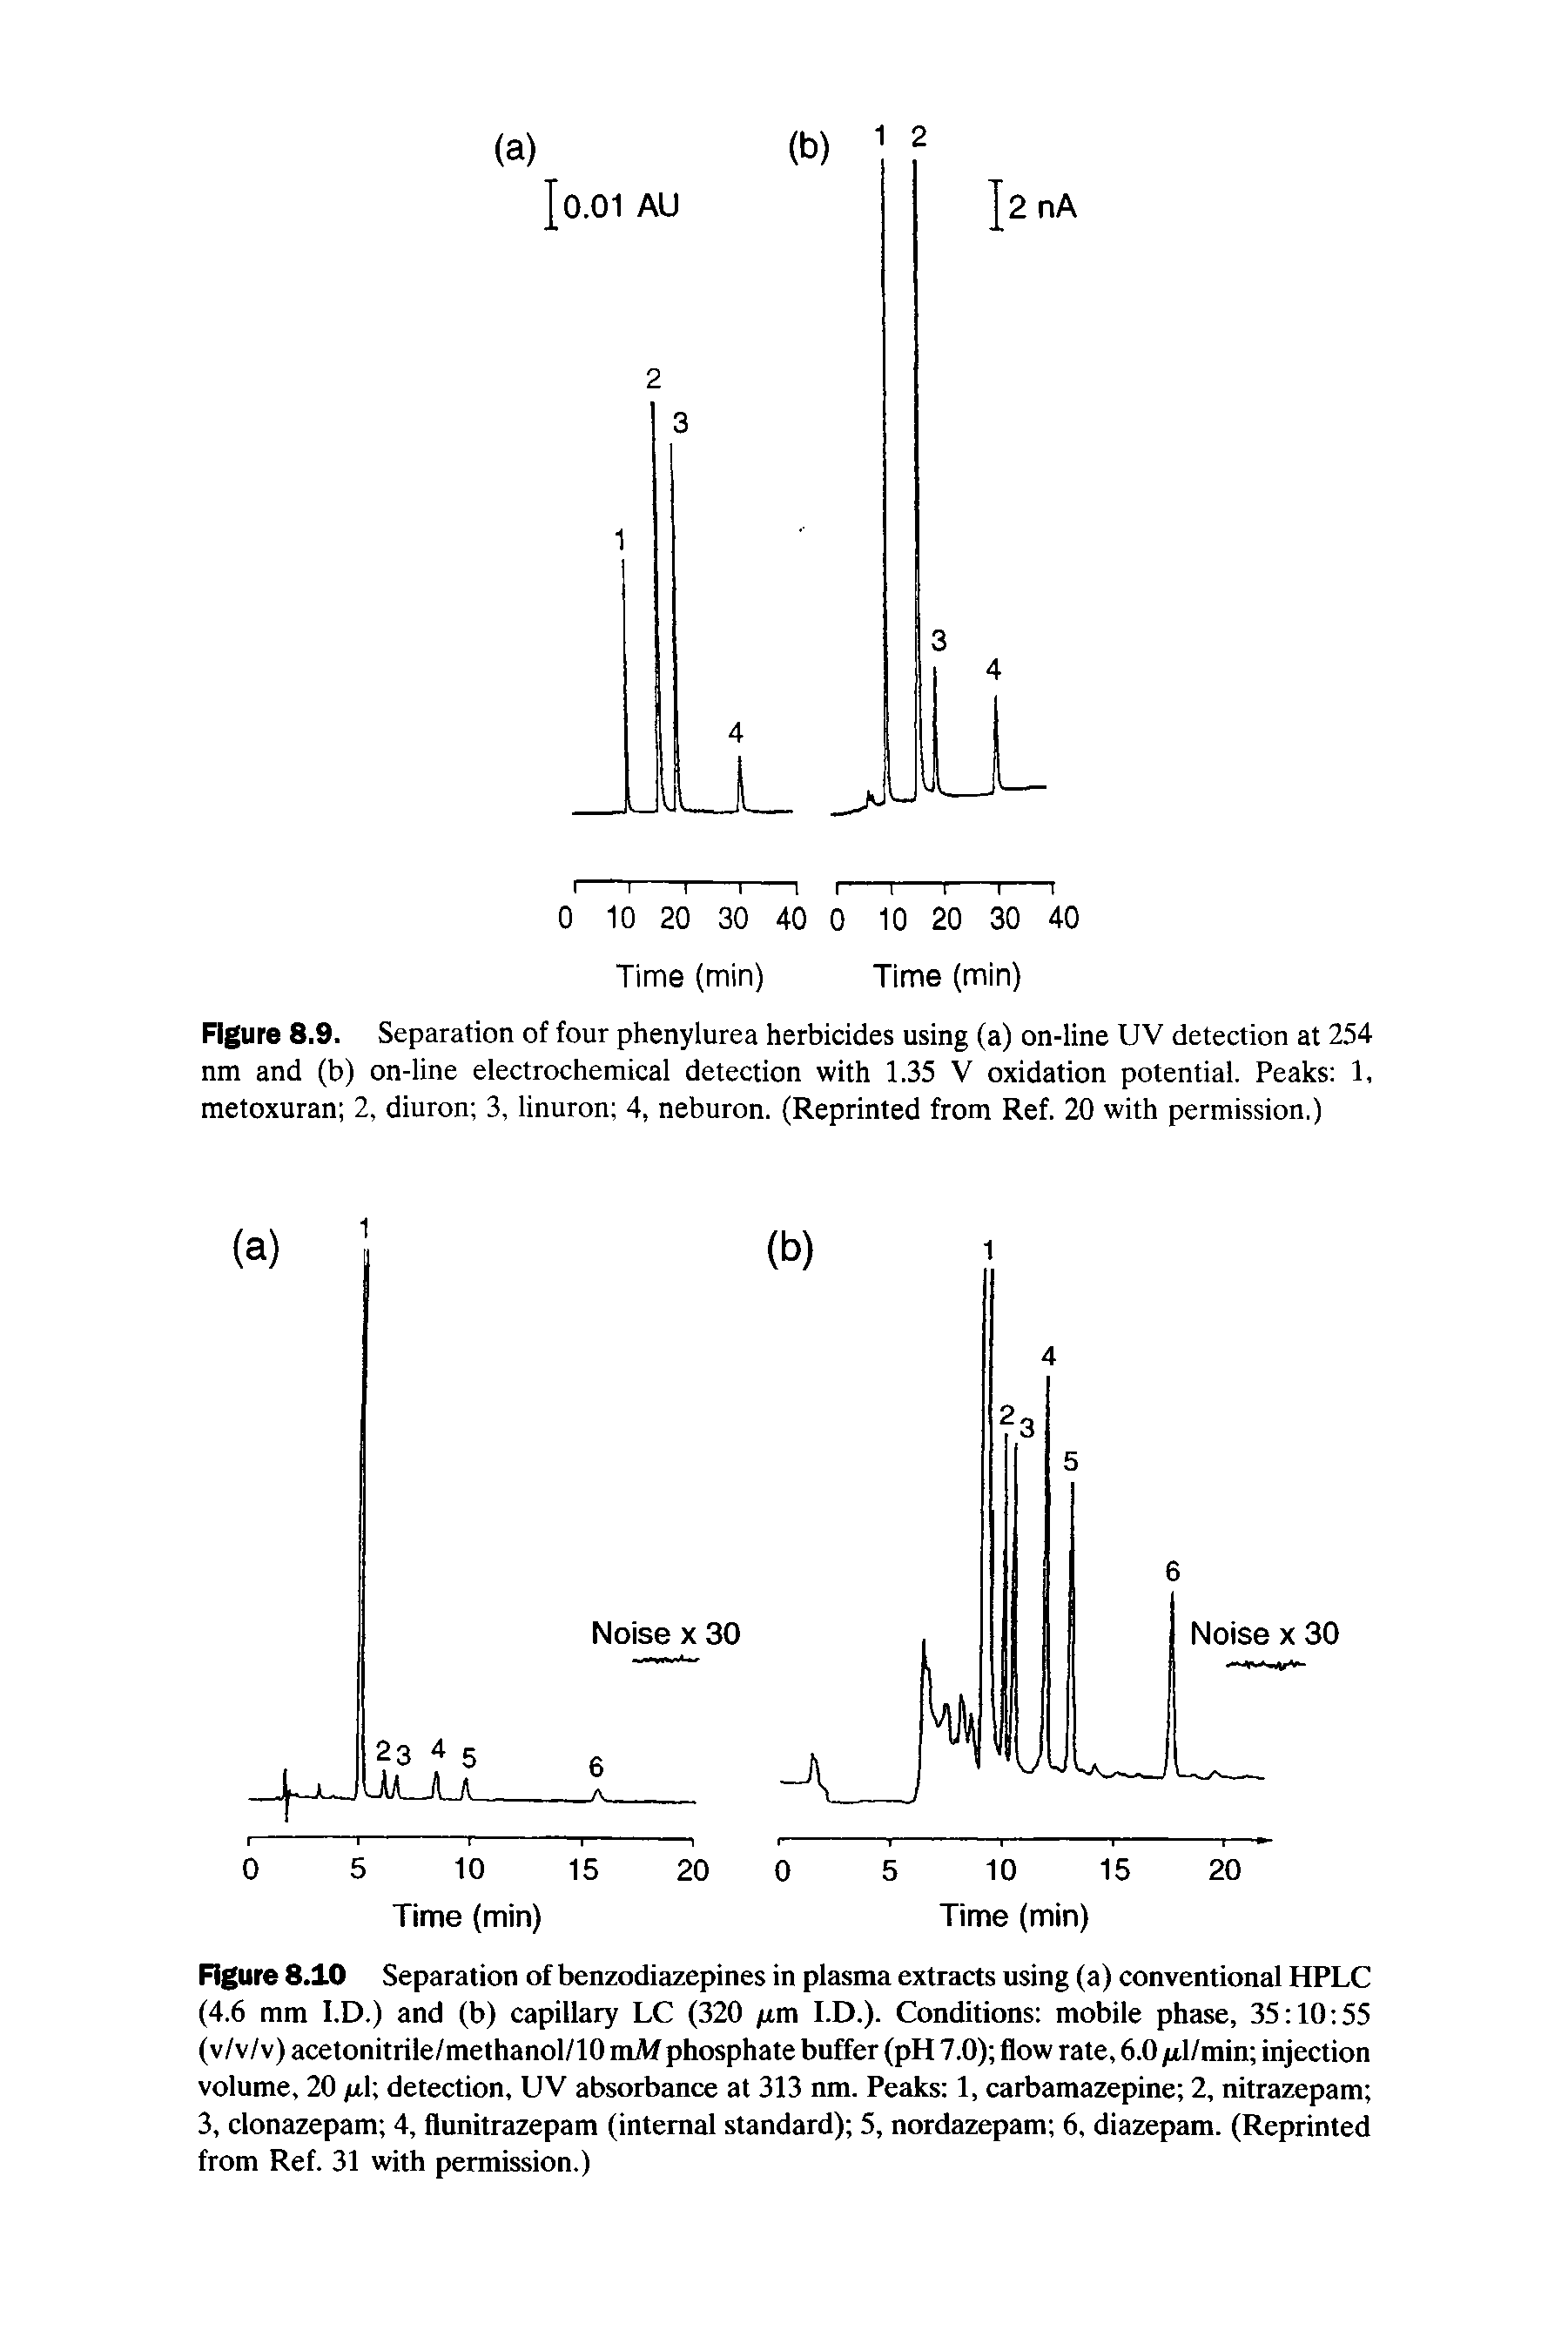 Figure 8.9. Separation of four phenylurea herbicides using (a) on-line UV detection at 254 nm and (b) on-line electrochemical detection with 1.35 V oxidation potential. Peaks 1, metoxuran 2, diuron 3, linuron 4, neburon. (Reprinted from Ref. 20 with permission.)...